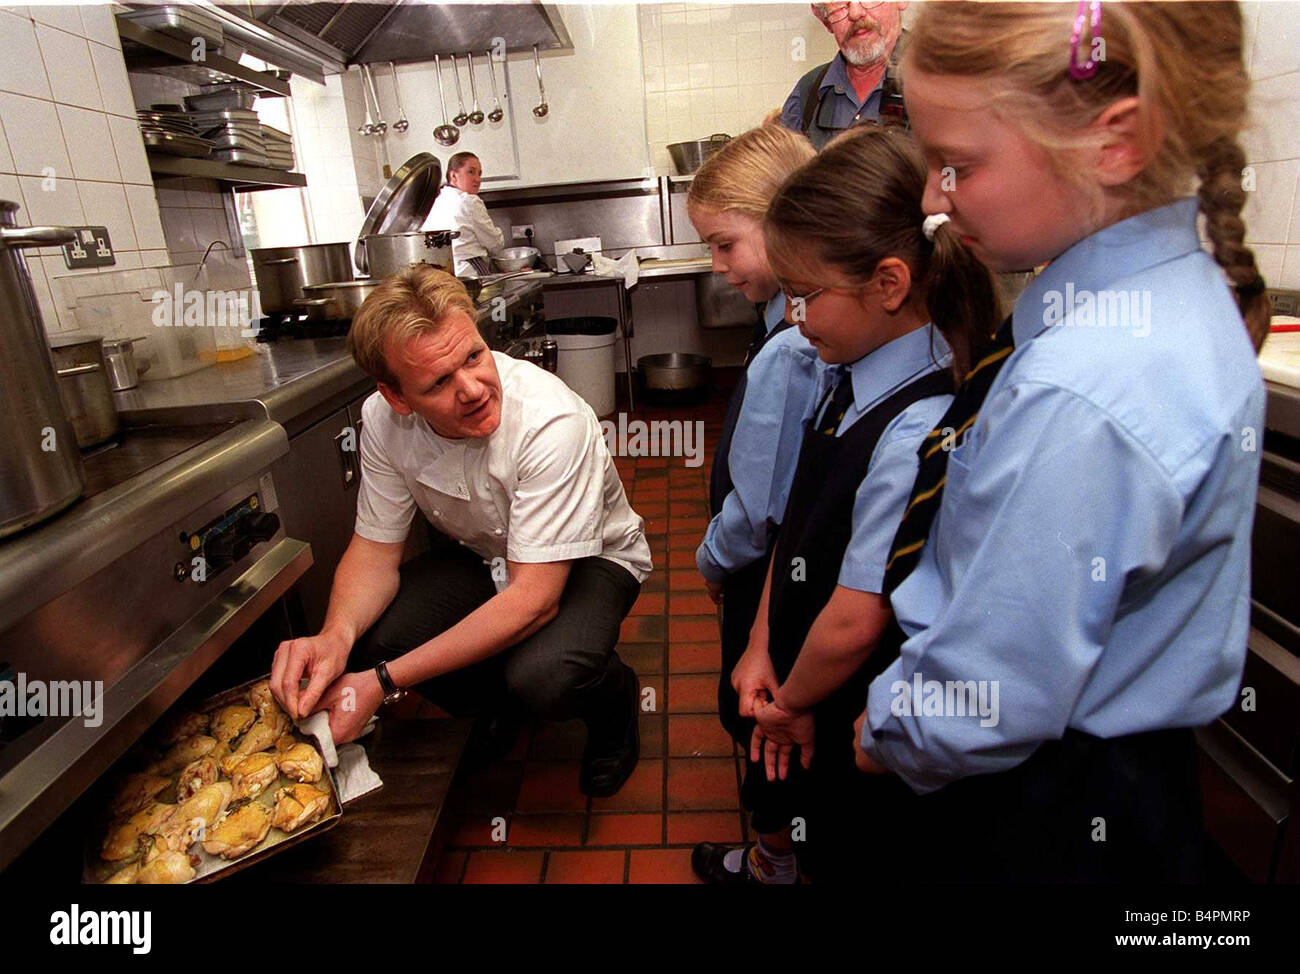 Gordon Ramsay at Amarylis restaurant with young girls June 2001 Stock Photo